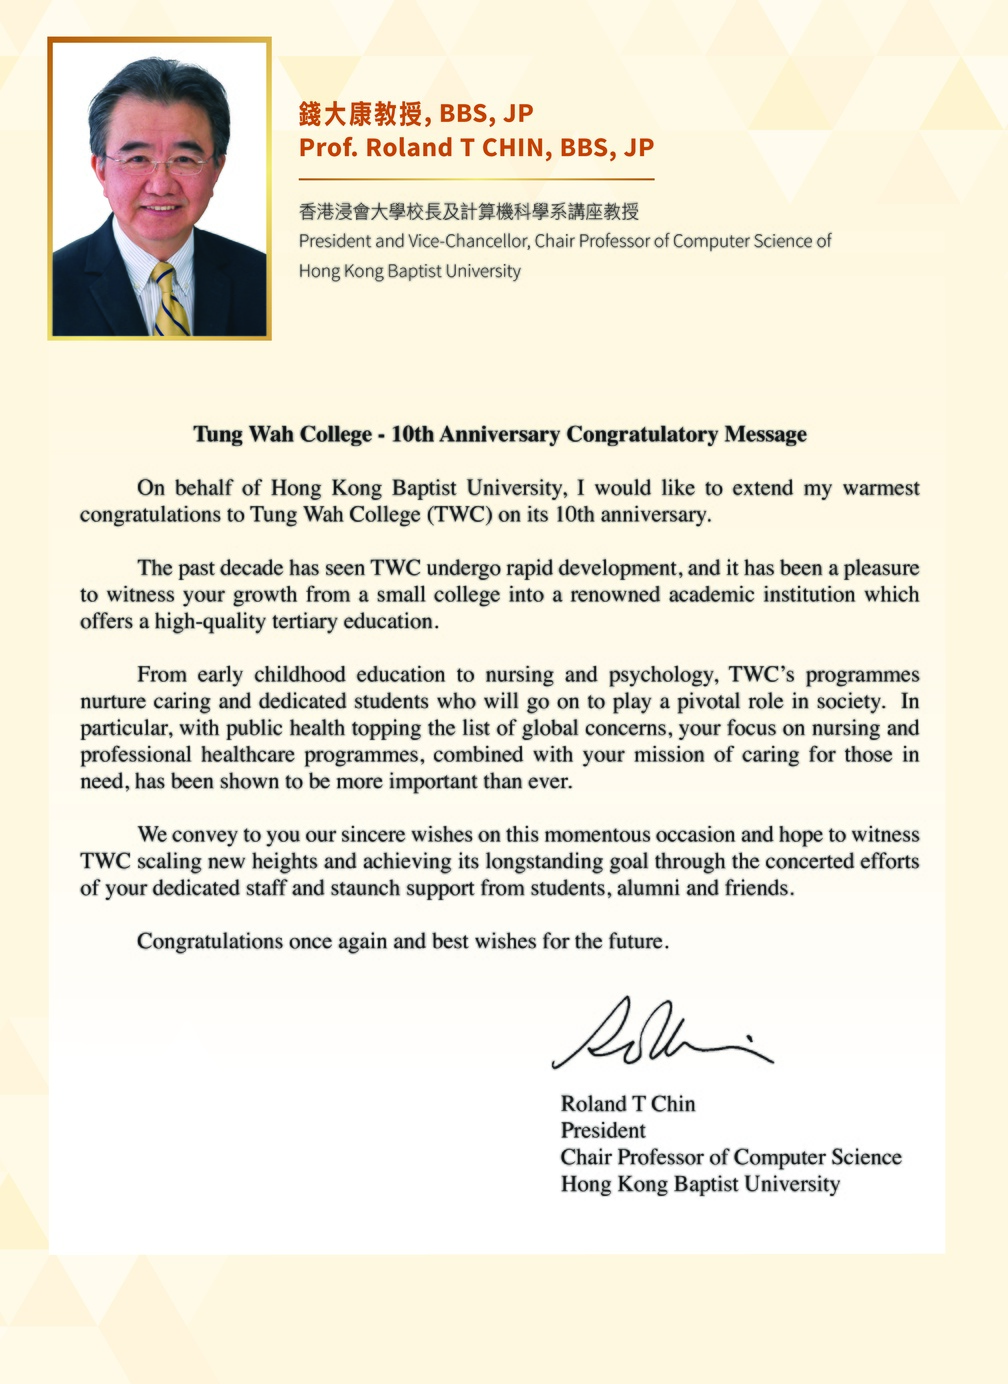 President and Vice-Chancellor, Chair Professor of Computer Science of Hong Kong Baptist University